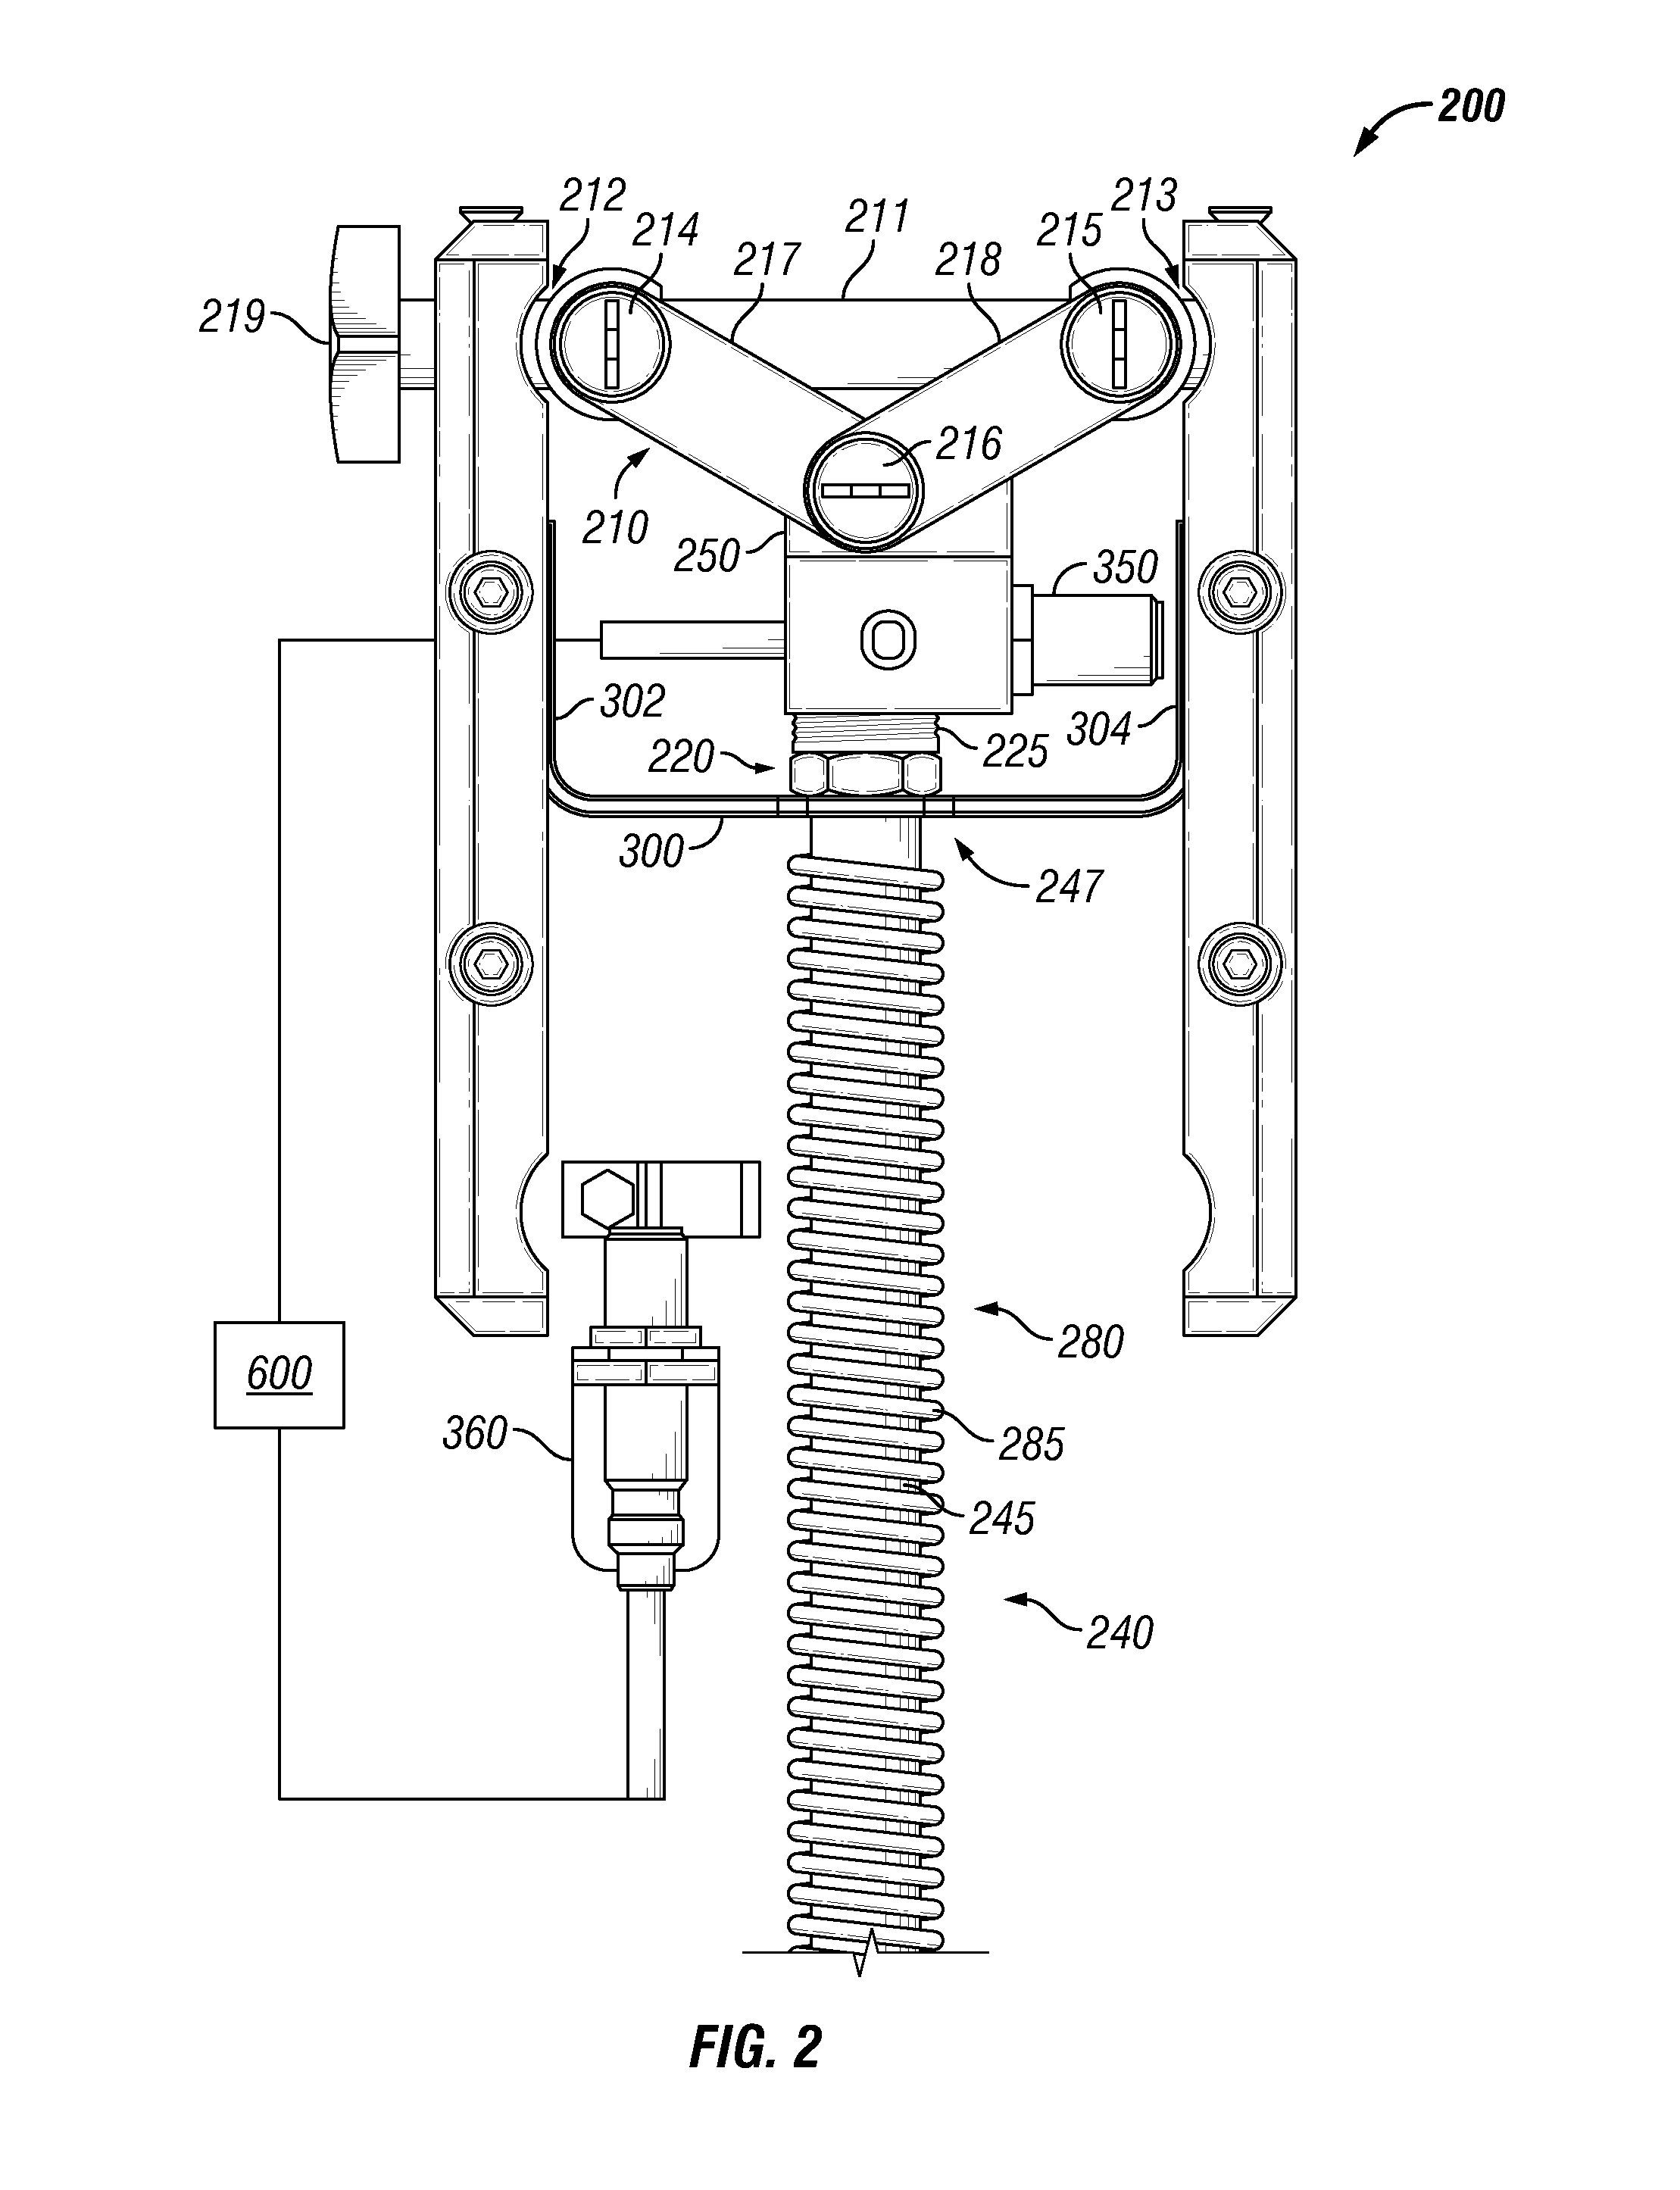 Manually operable clipping-machine